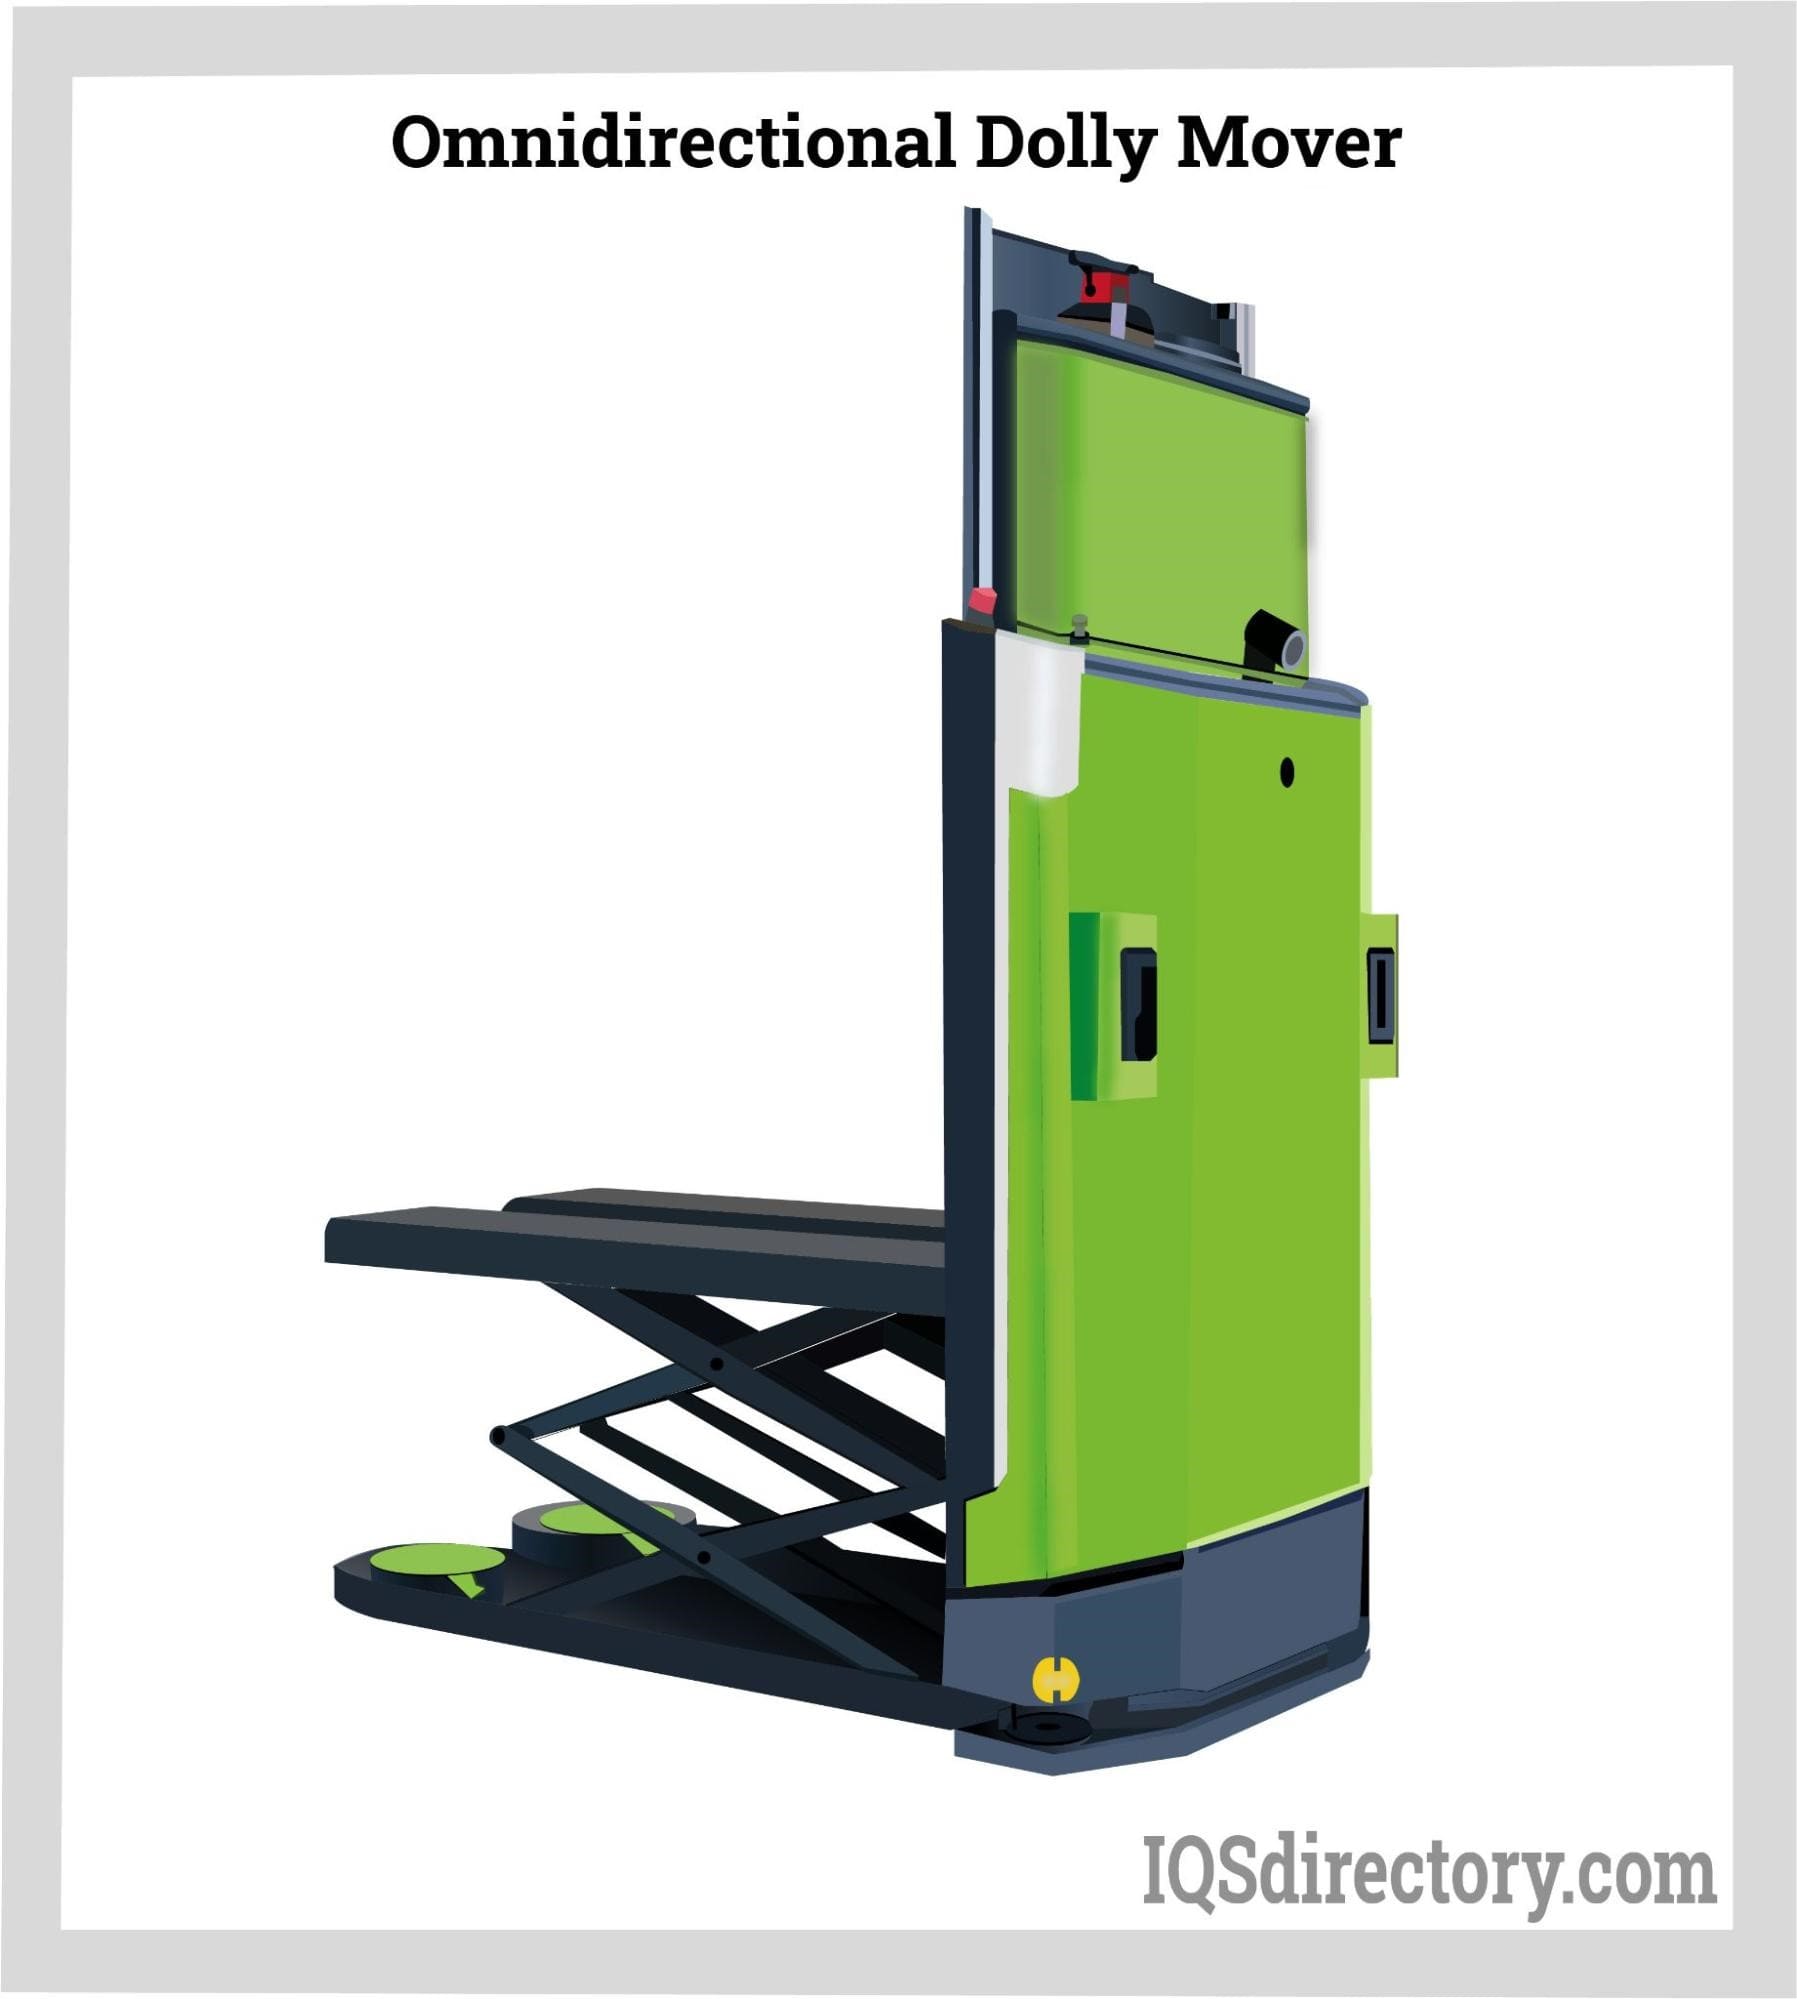 Omnidirectional Dolly Mover